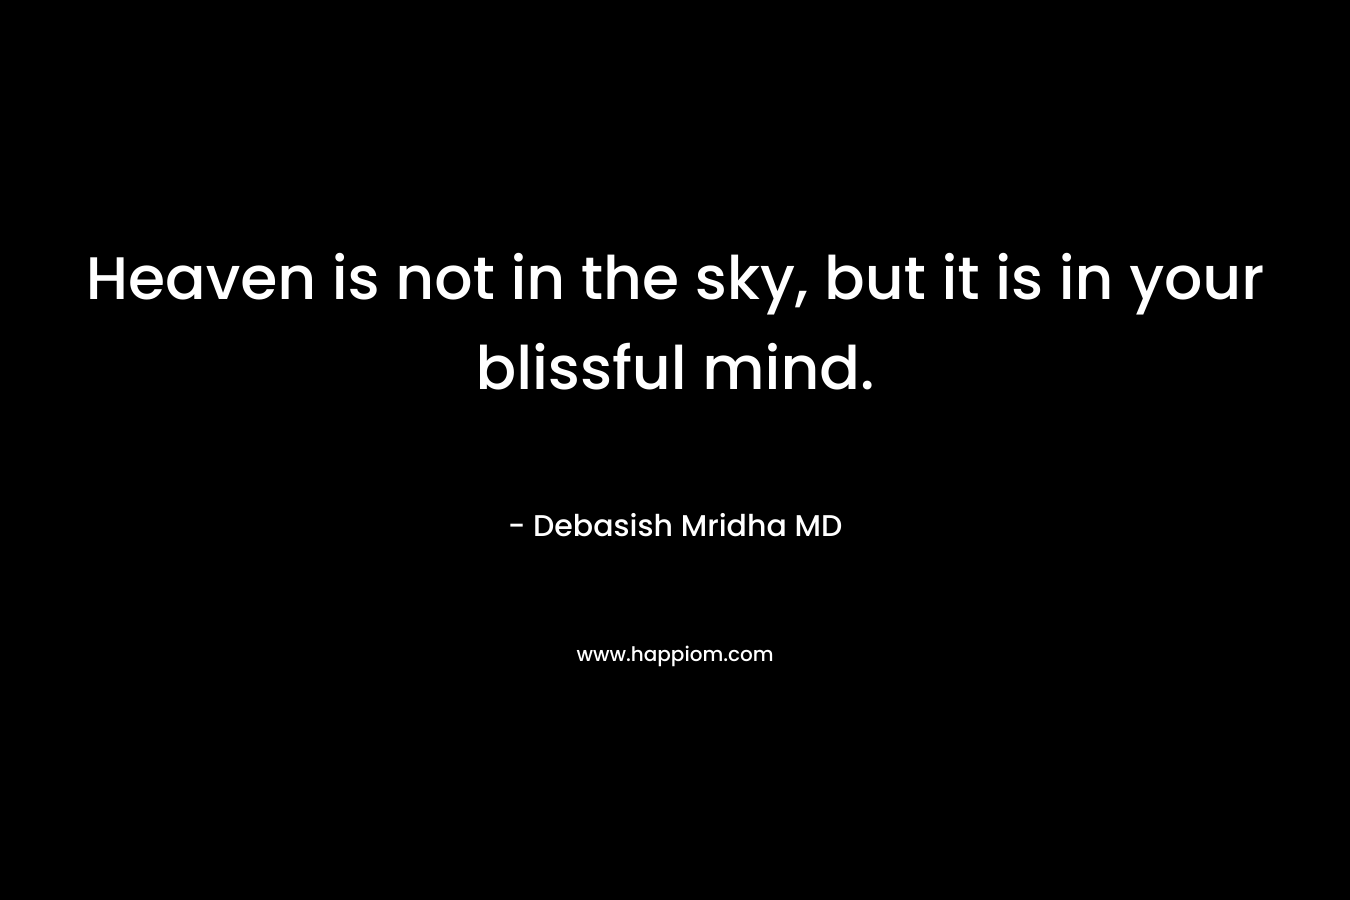 Heaven is not in the sky, but it is in your blissful mind.